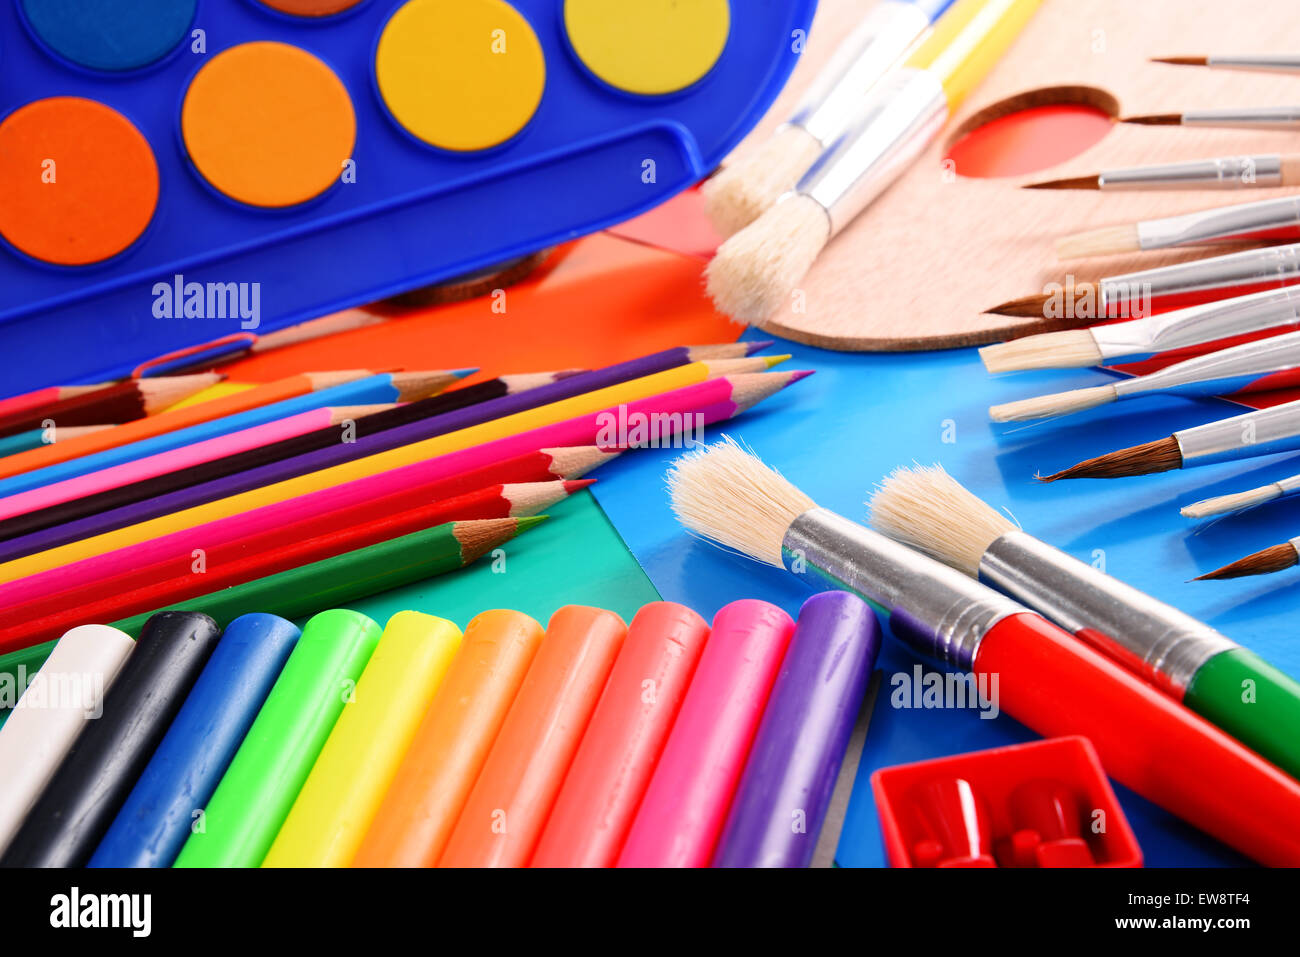 Composition with school accessories for painting and drawing. Stock Photo